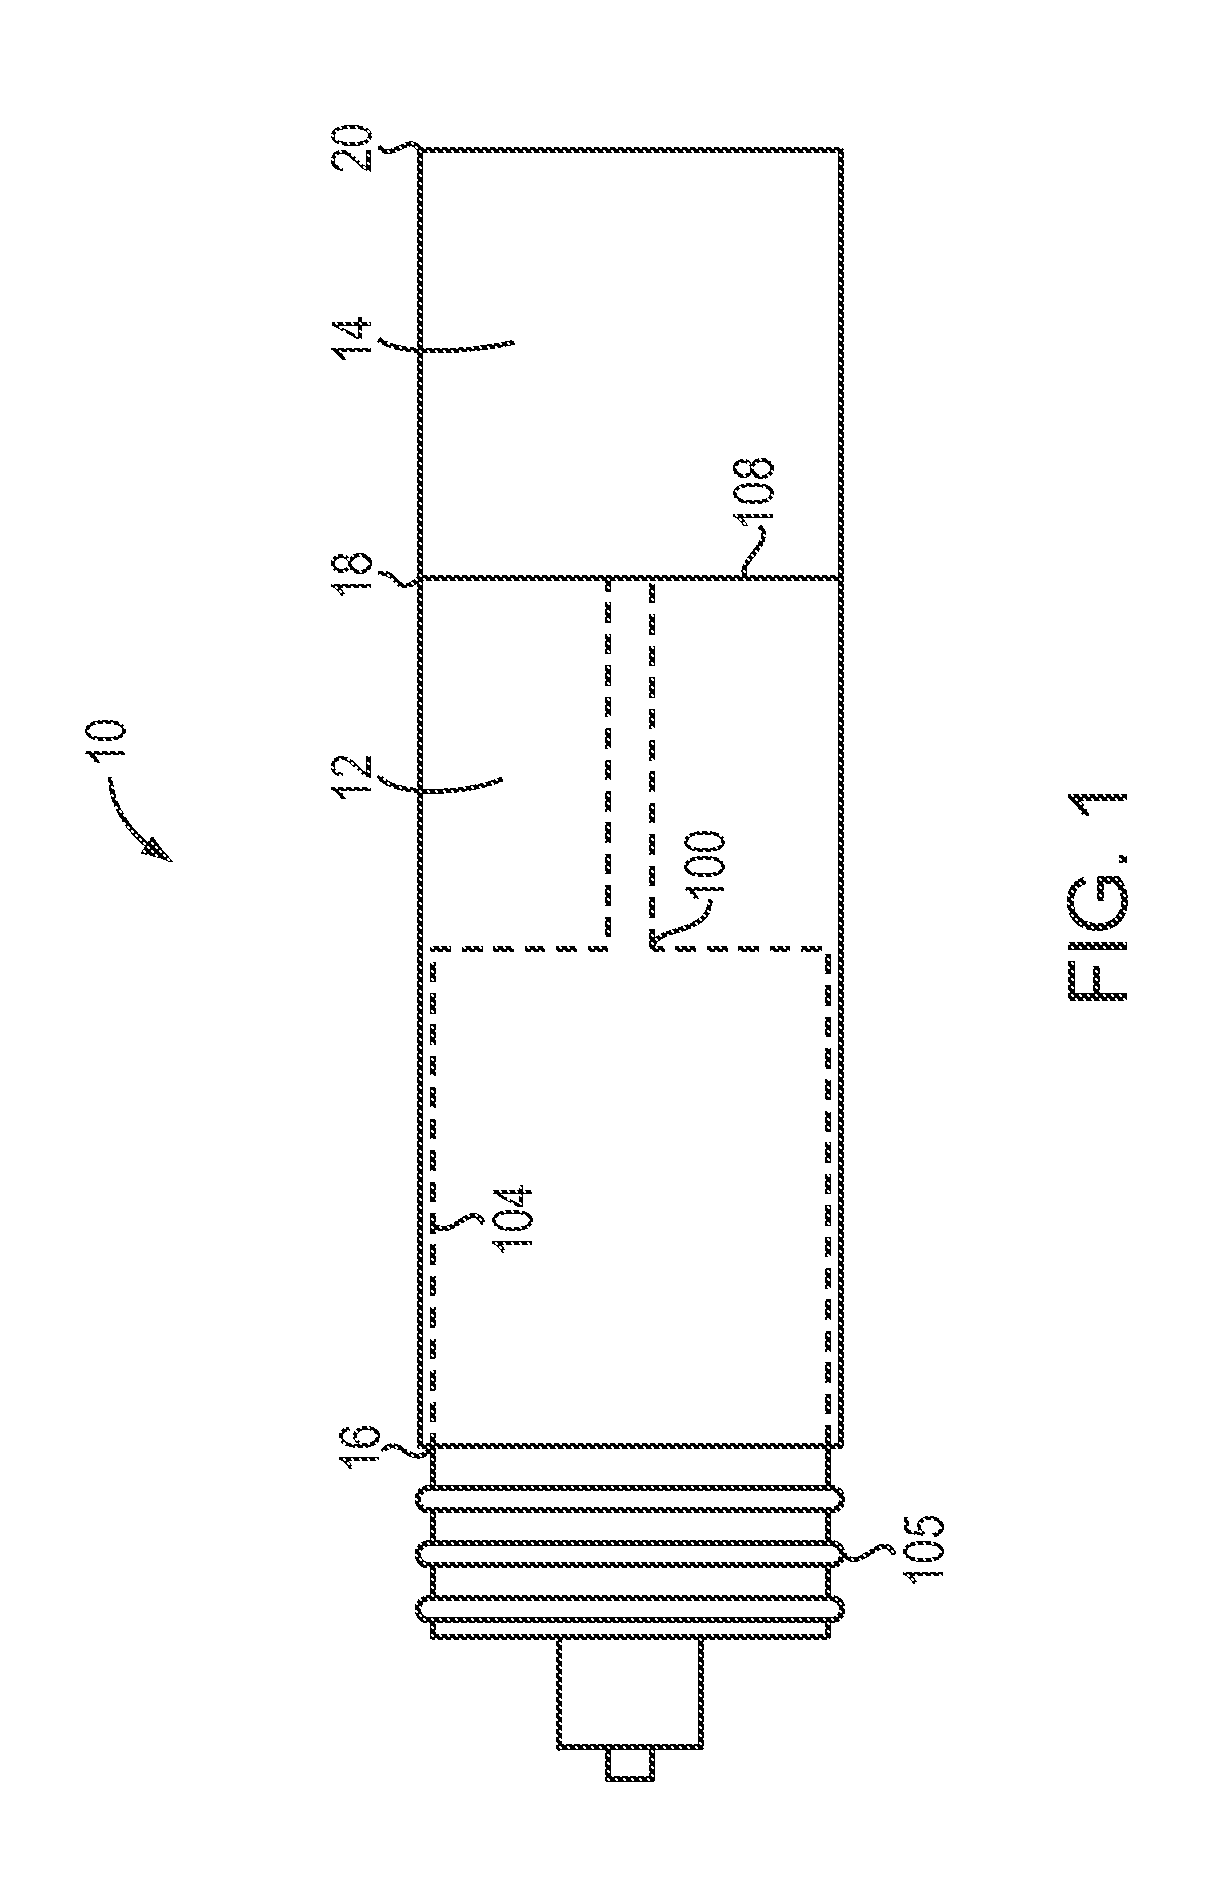 Systems and methods for processing cells